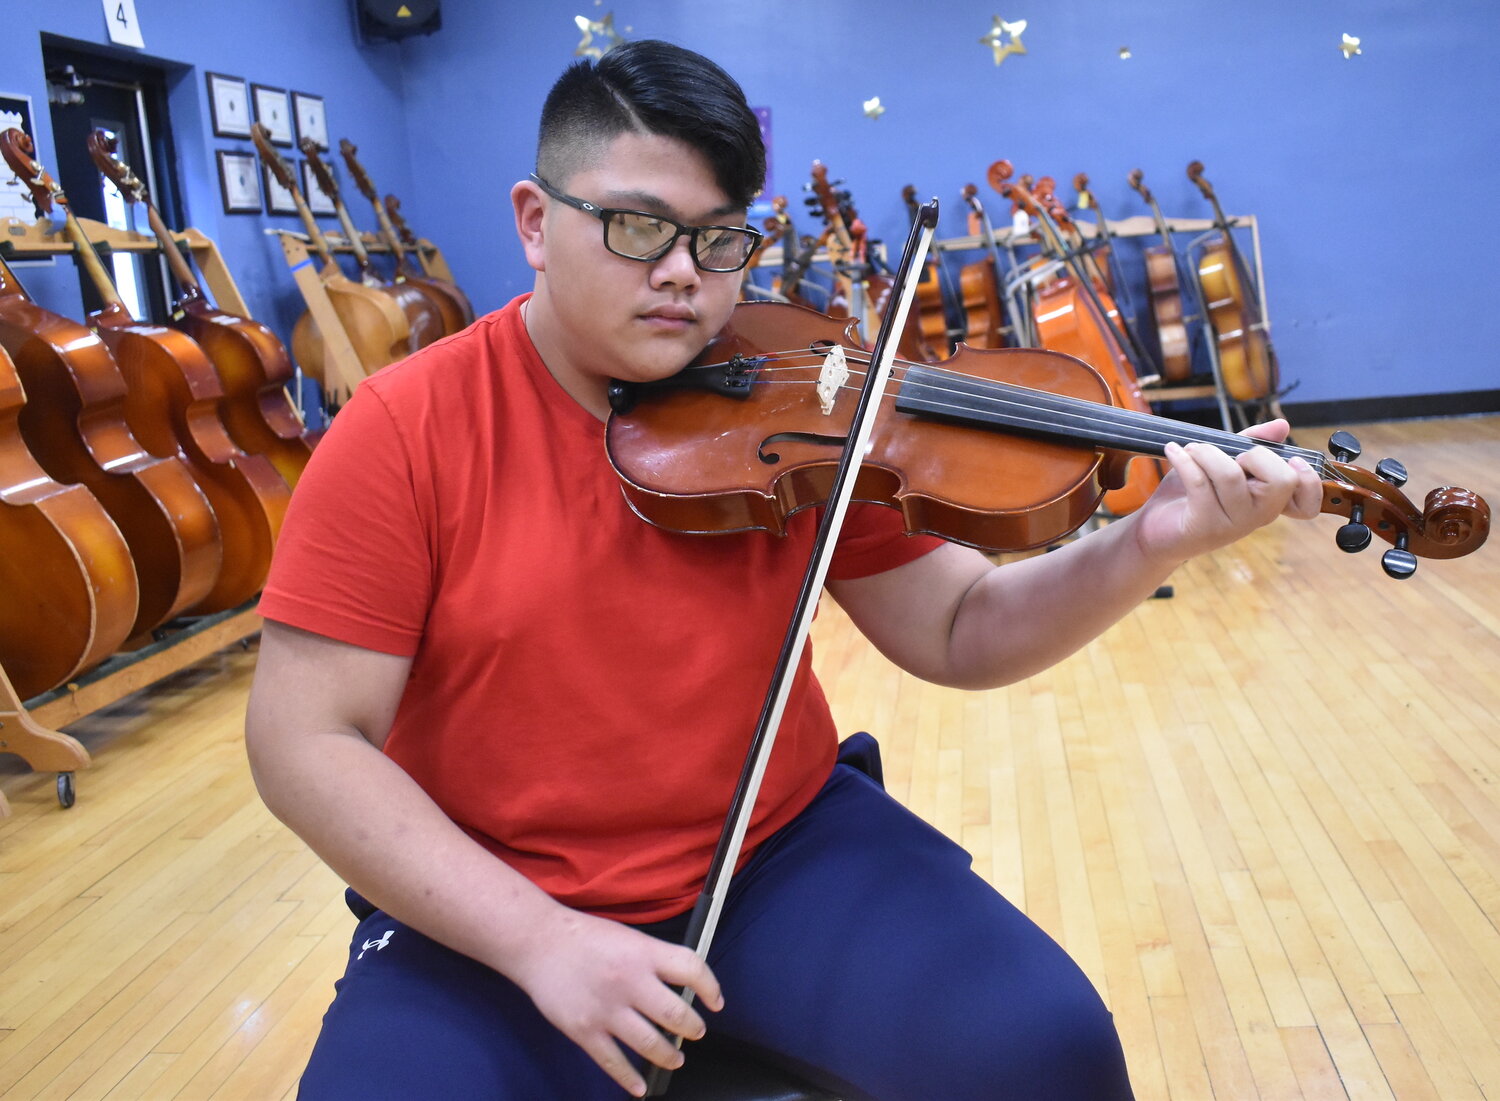 Wantagh Middle School student Adrian De Chavez has become a talented violist, and has performed in venues including Madison Square Garden and Barclays Center.